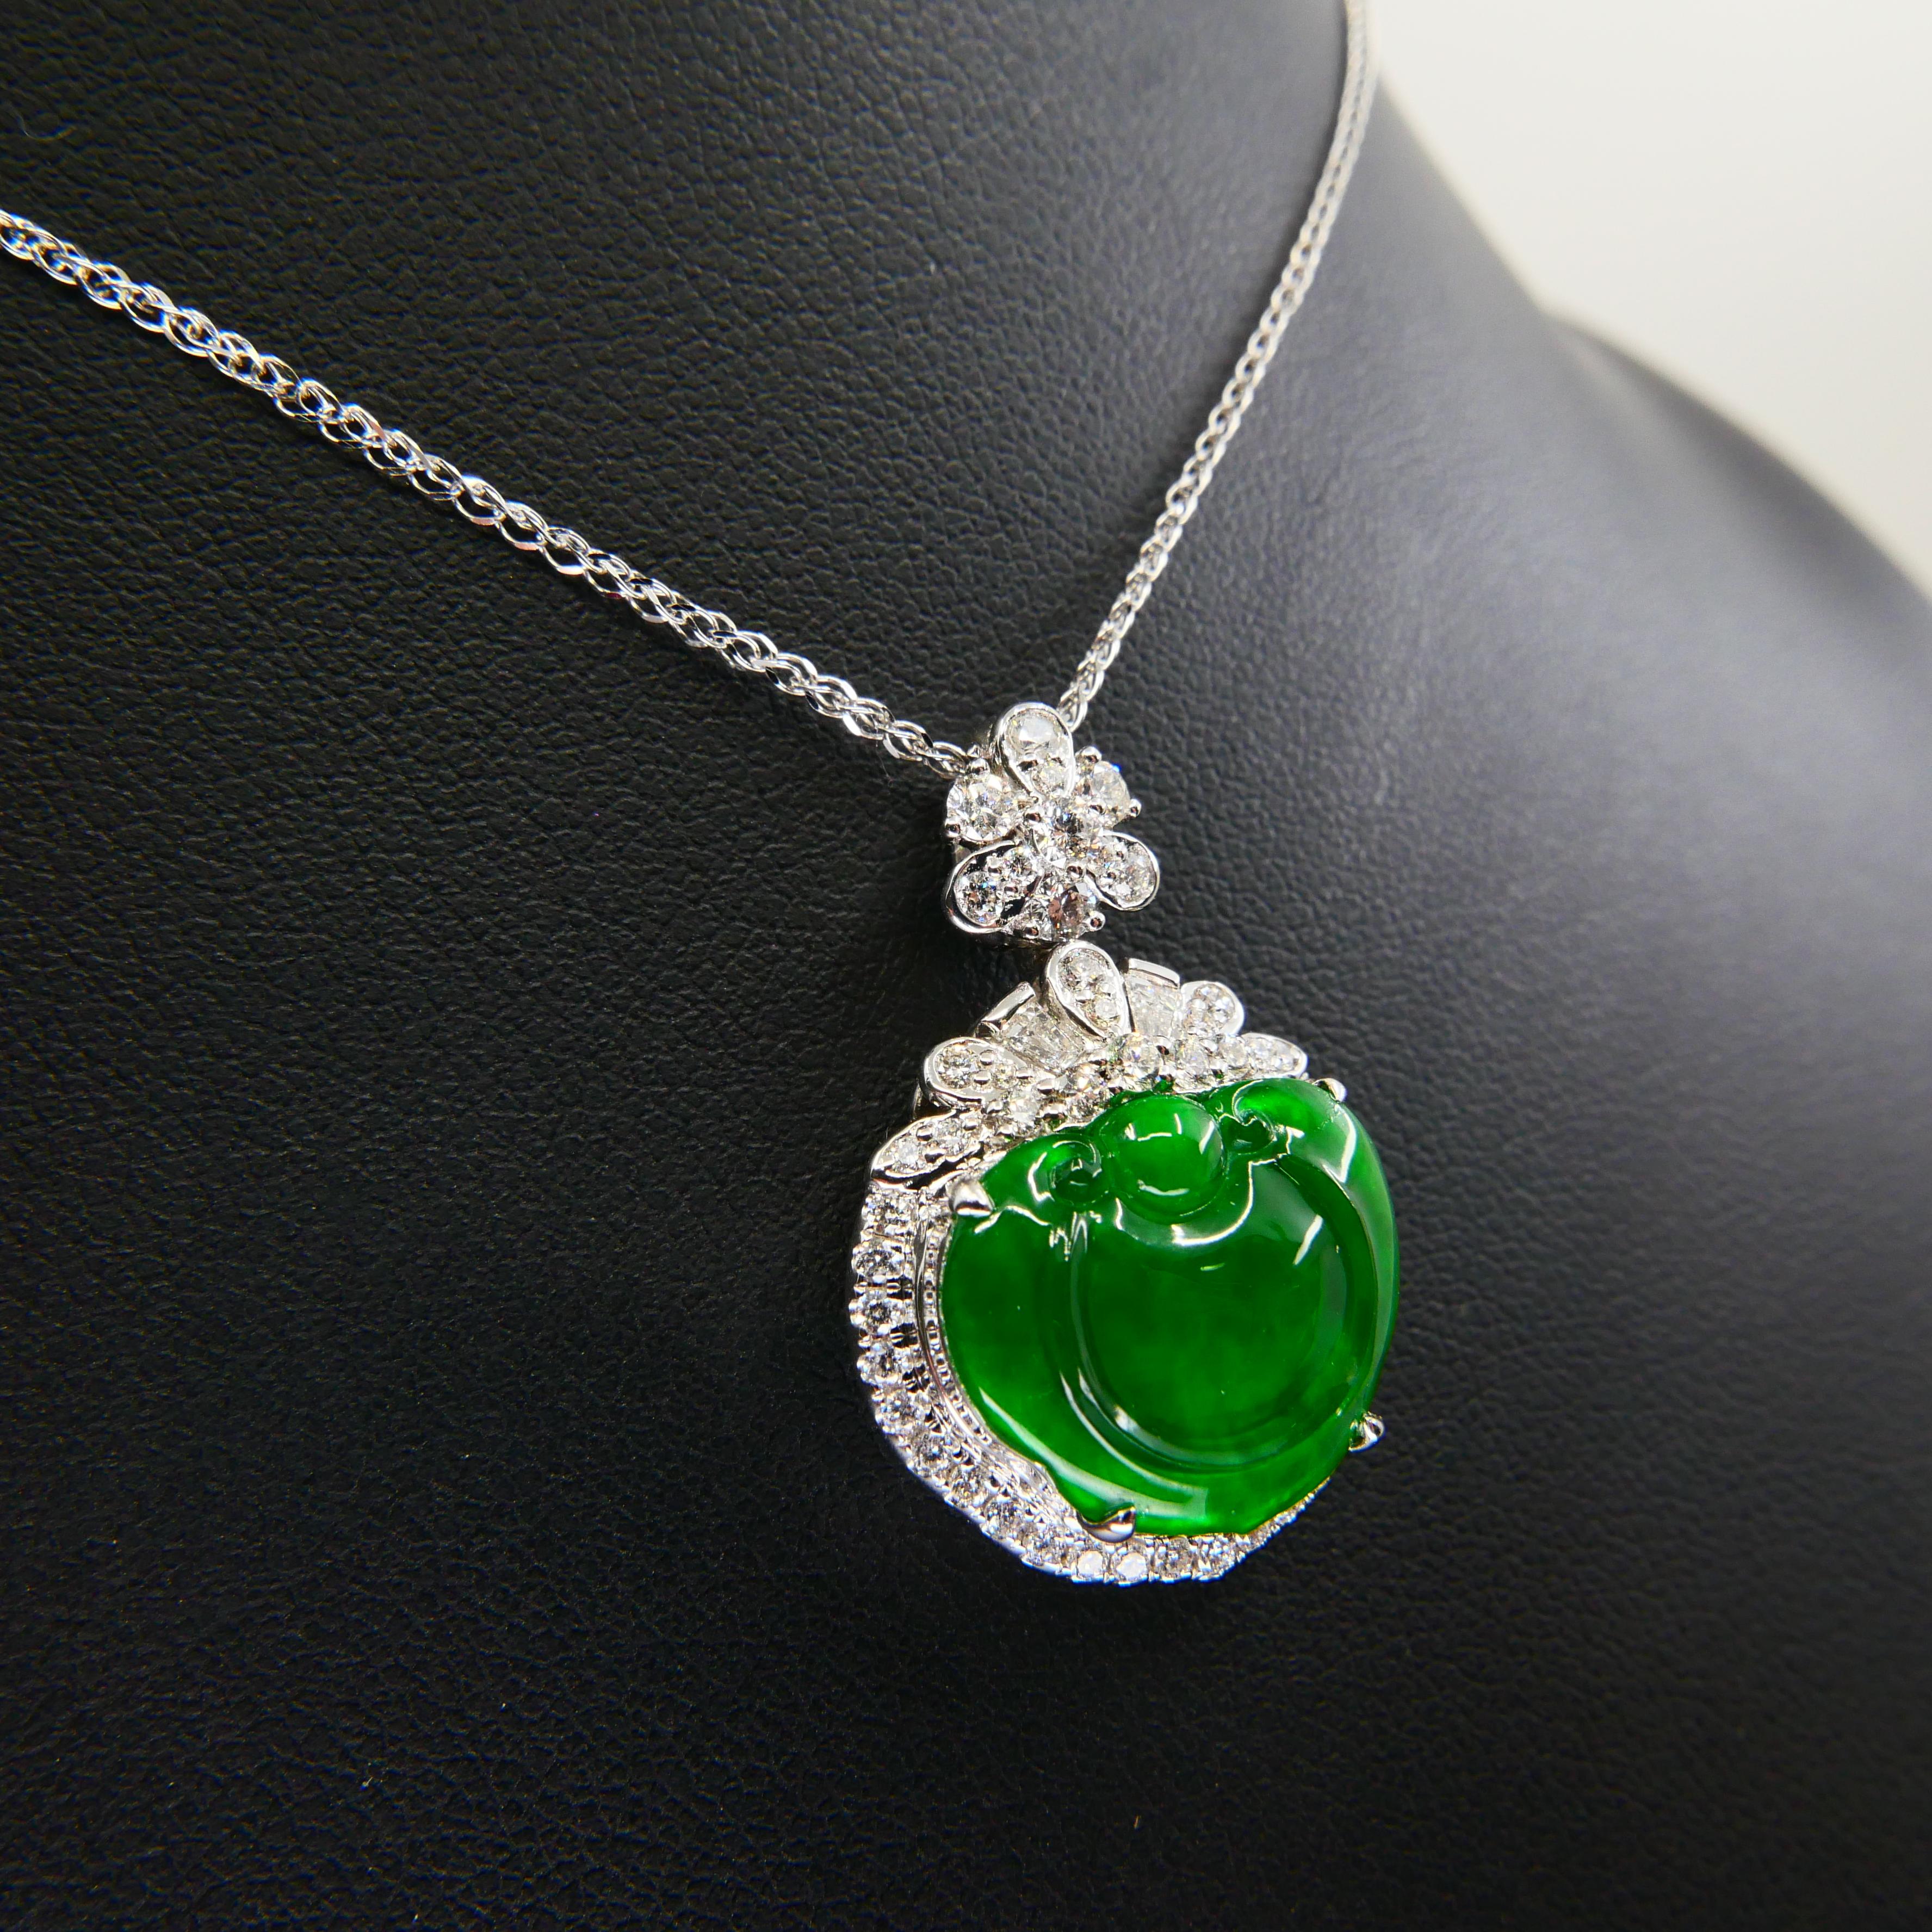 Certified Type A Icy Jade & Diamond Pendant Necklace, Glowing Apple Green Color For Sale 7